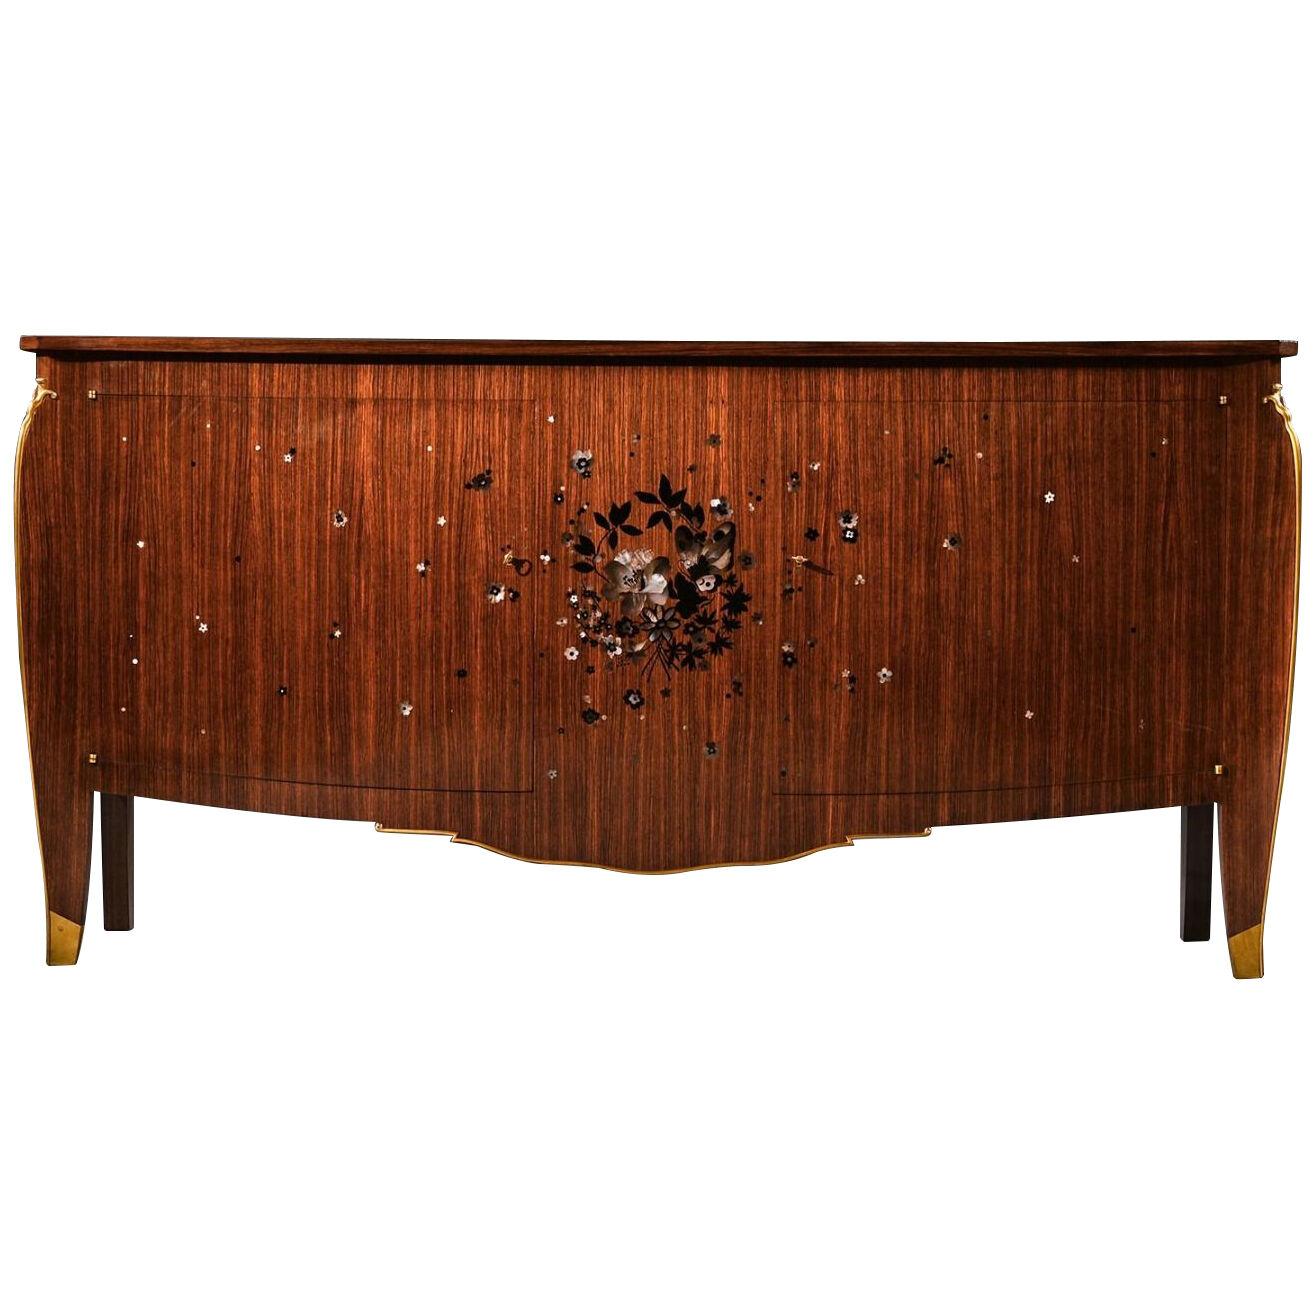 RARE JULES LELEU ART DECO PALISANDER AND MARQUETRY MOTHER OF PEARL SIDEBOARD